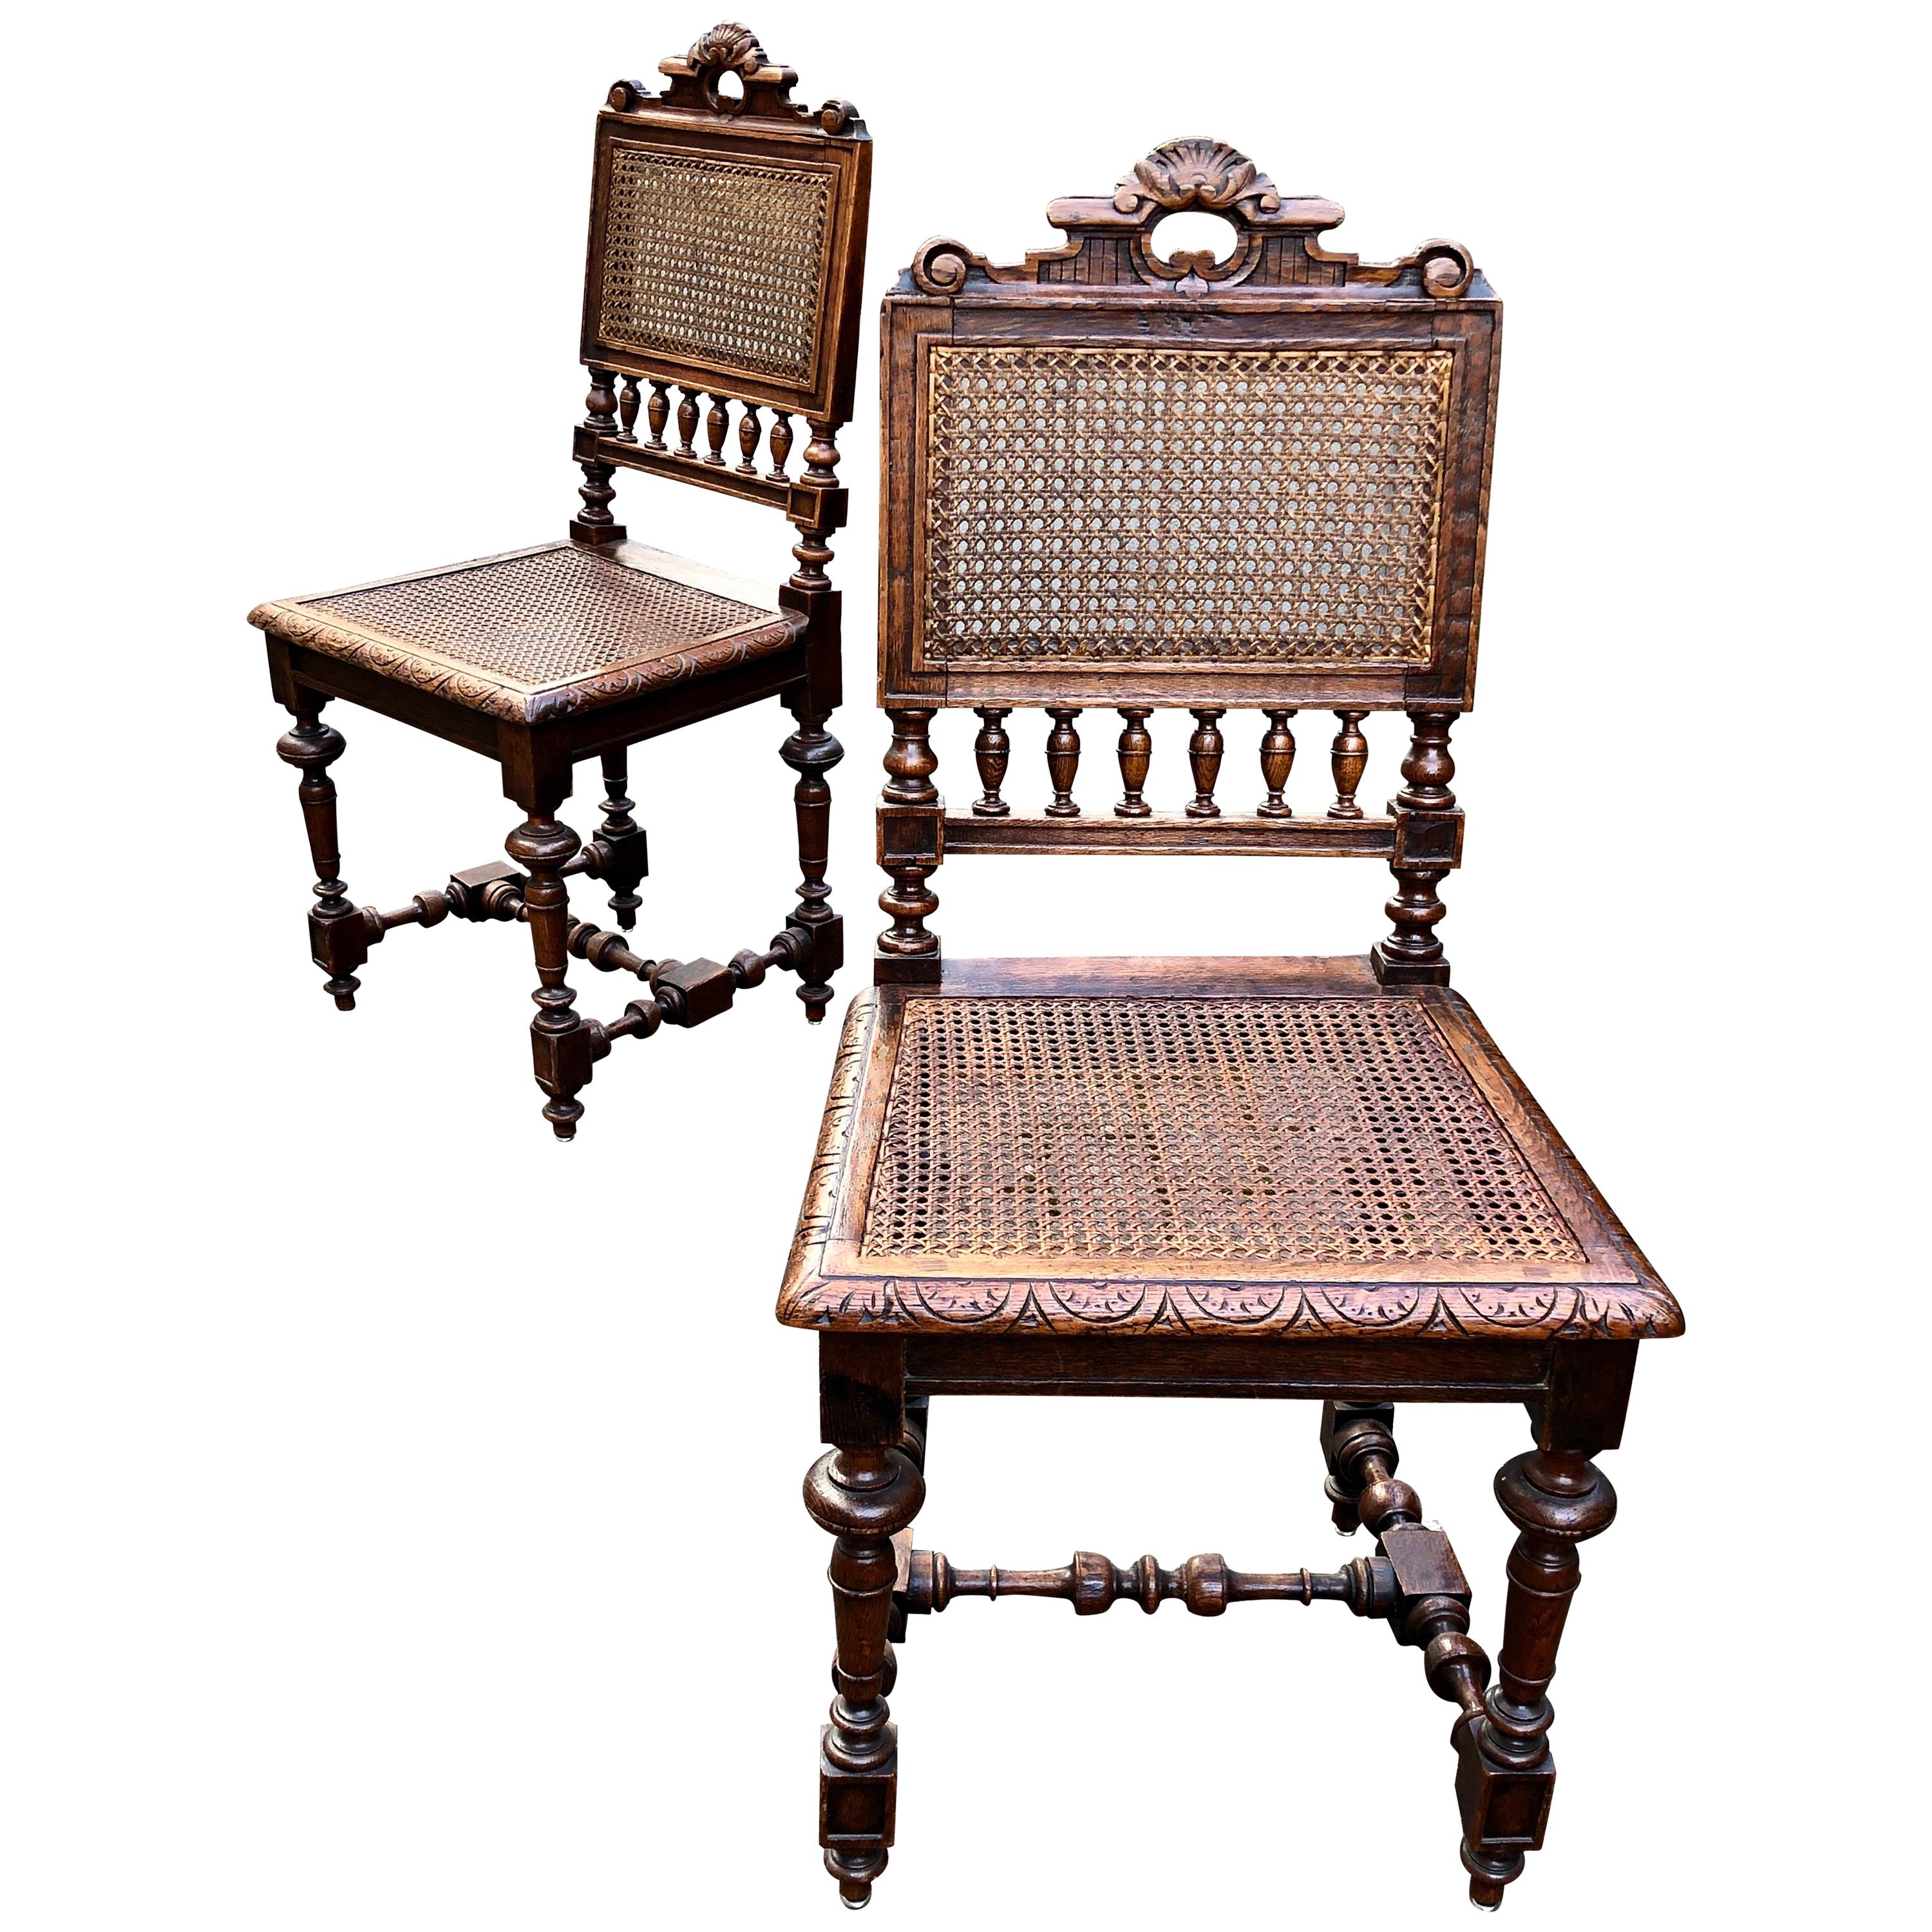 SALE Pair of Renaissance Revival Carved Cane Chairs Complimentary Shipping 